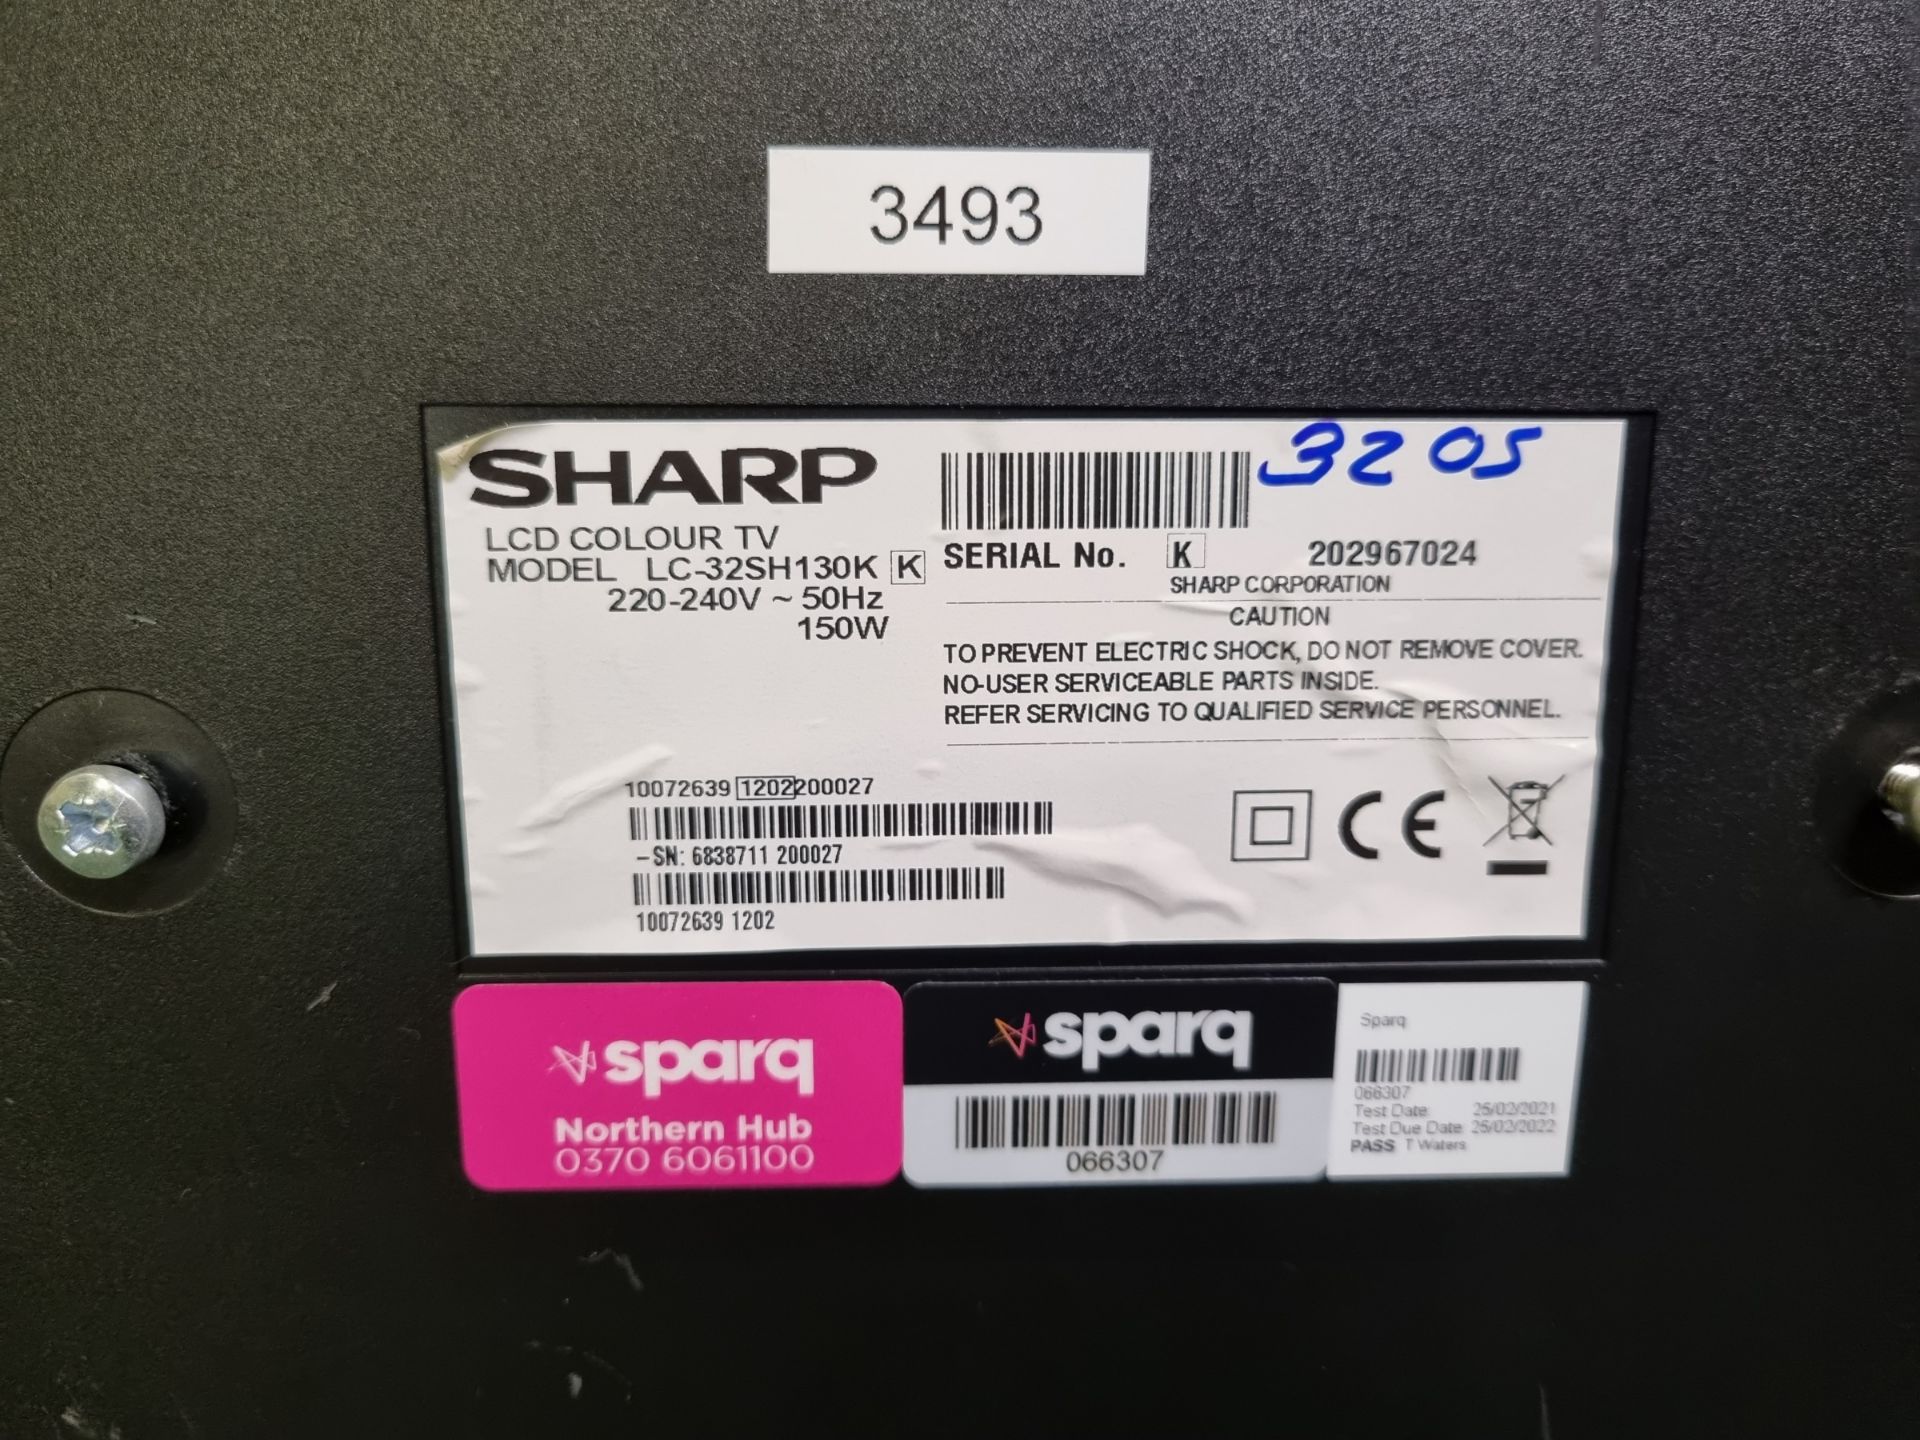 Sharp LC-32SH130K 32" TV - no stand - in flight case - Image 4 of 6